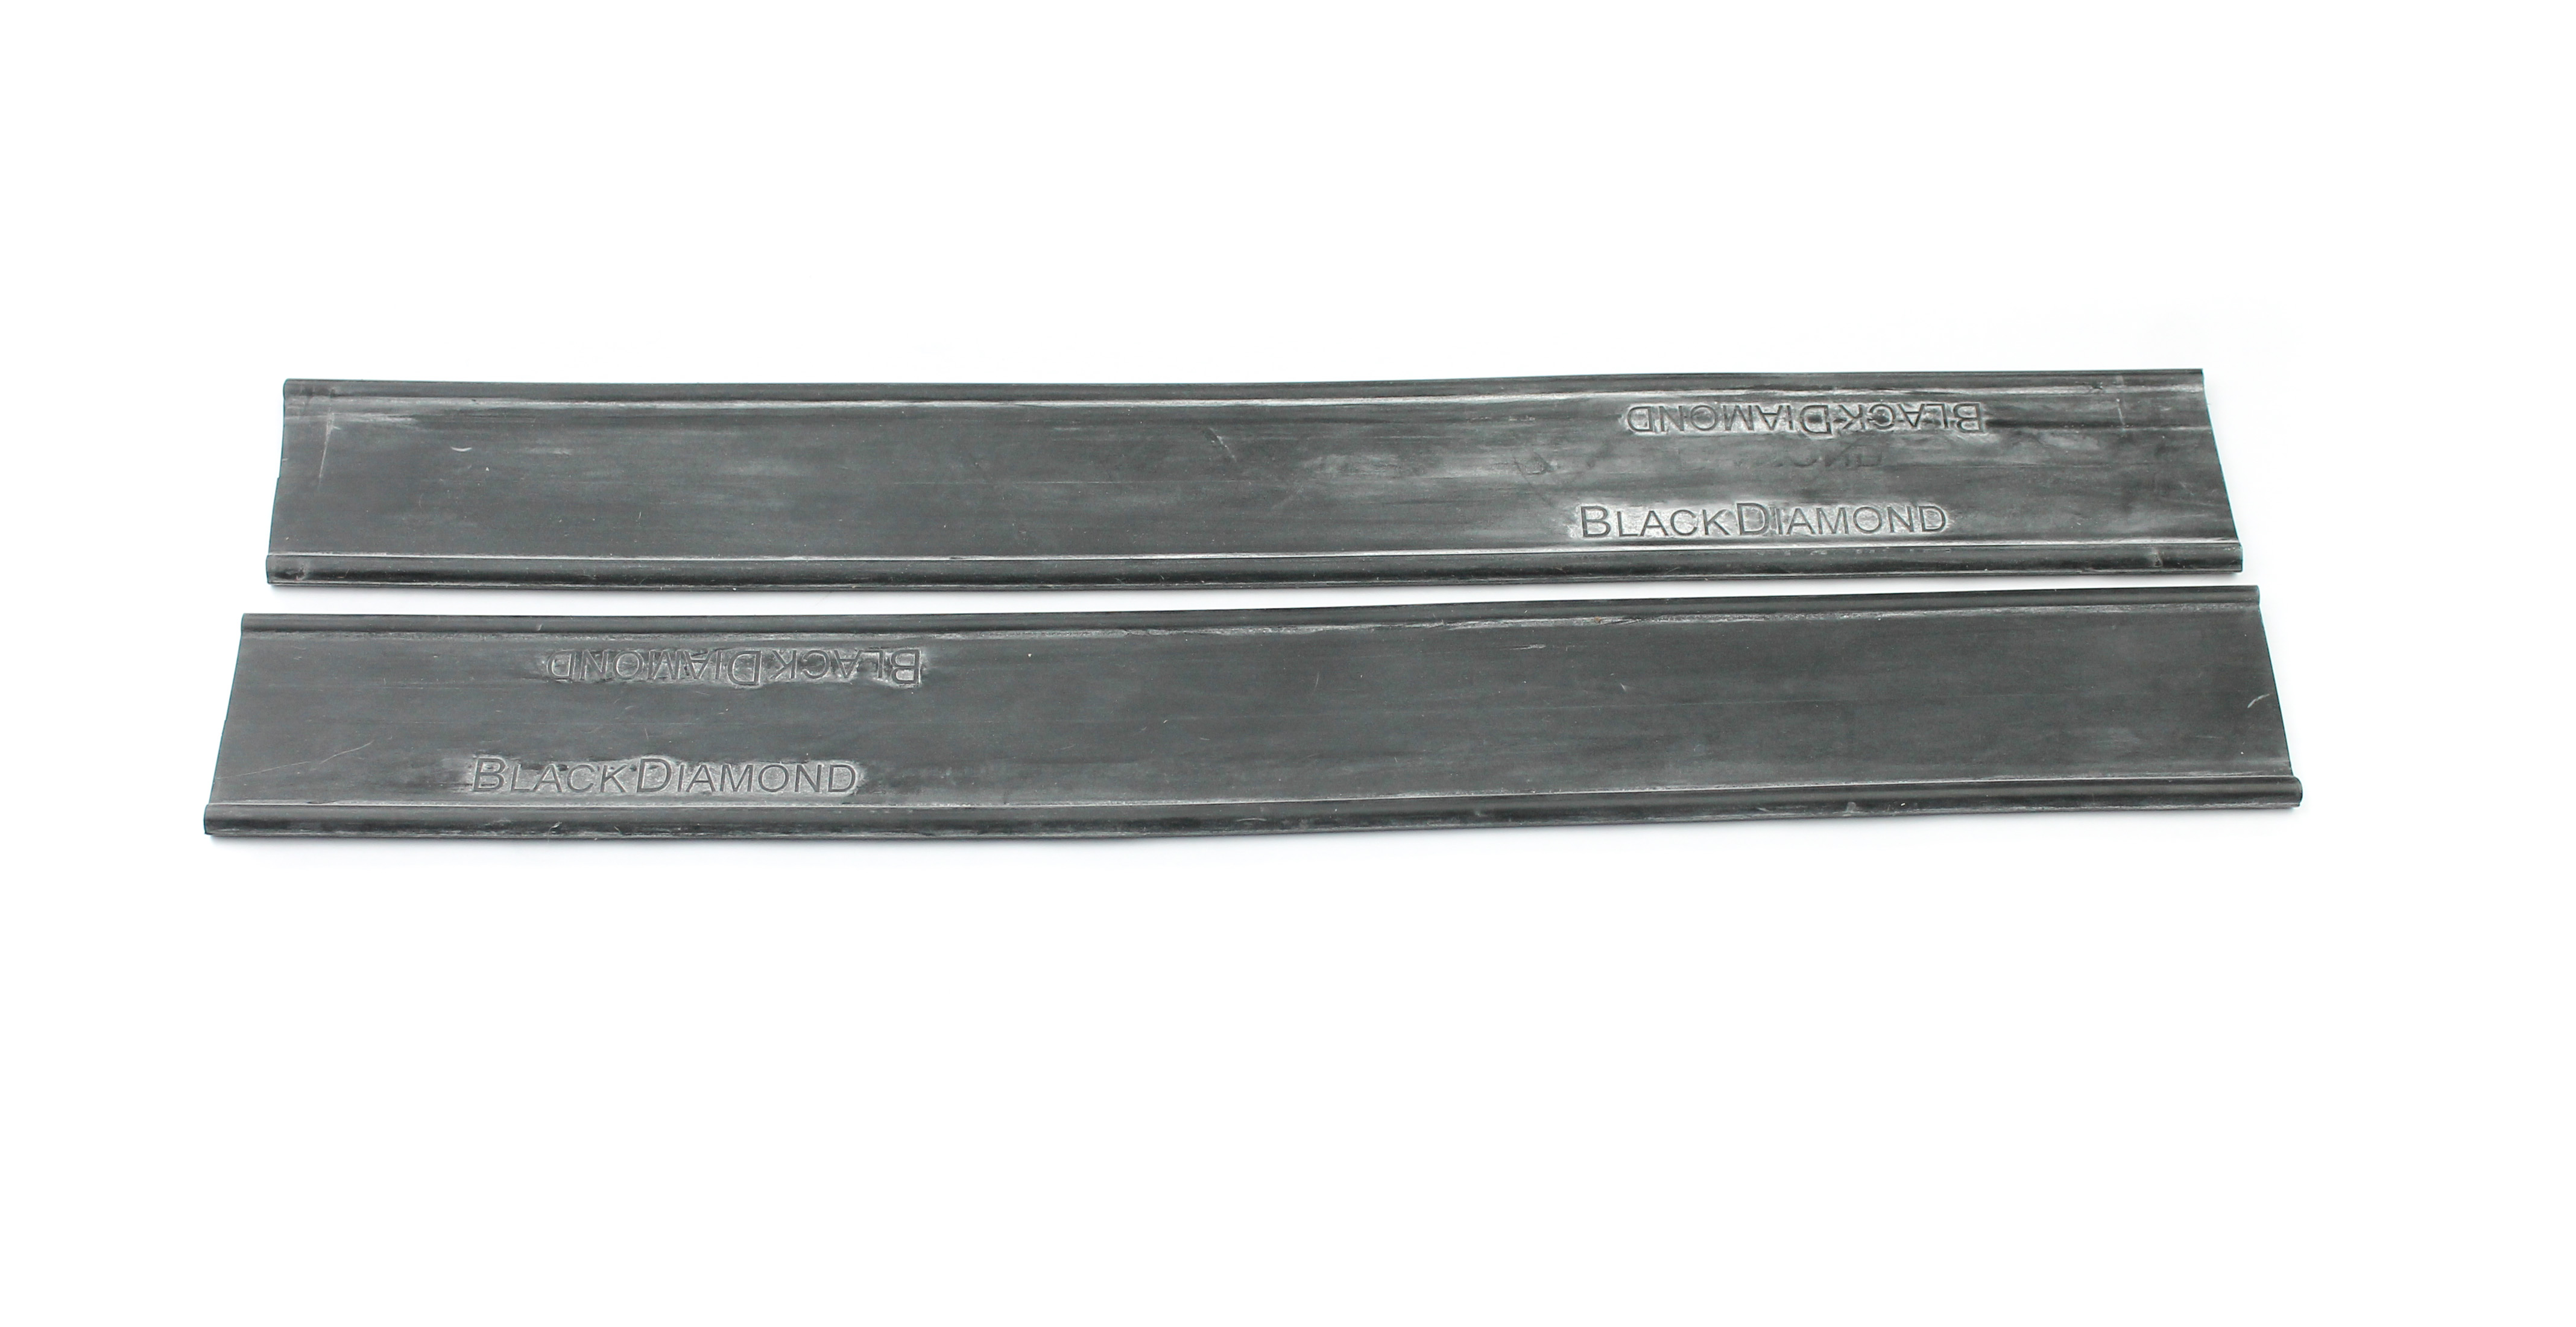 Black Diamond Squeegee Rubber 12 inch/30 cm - Pack of 26